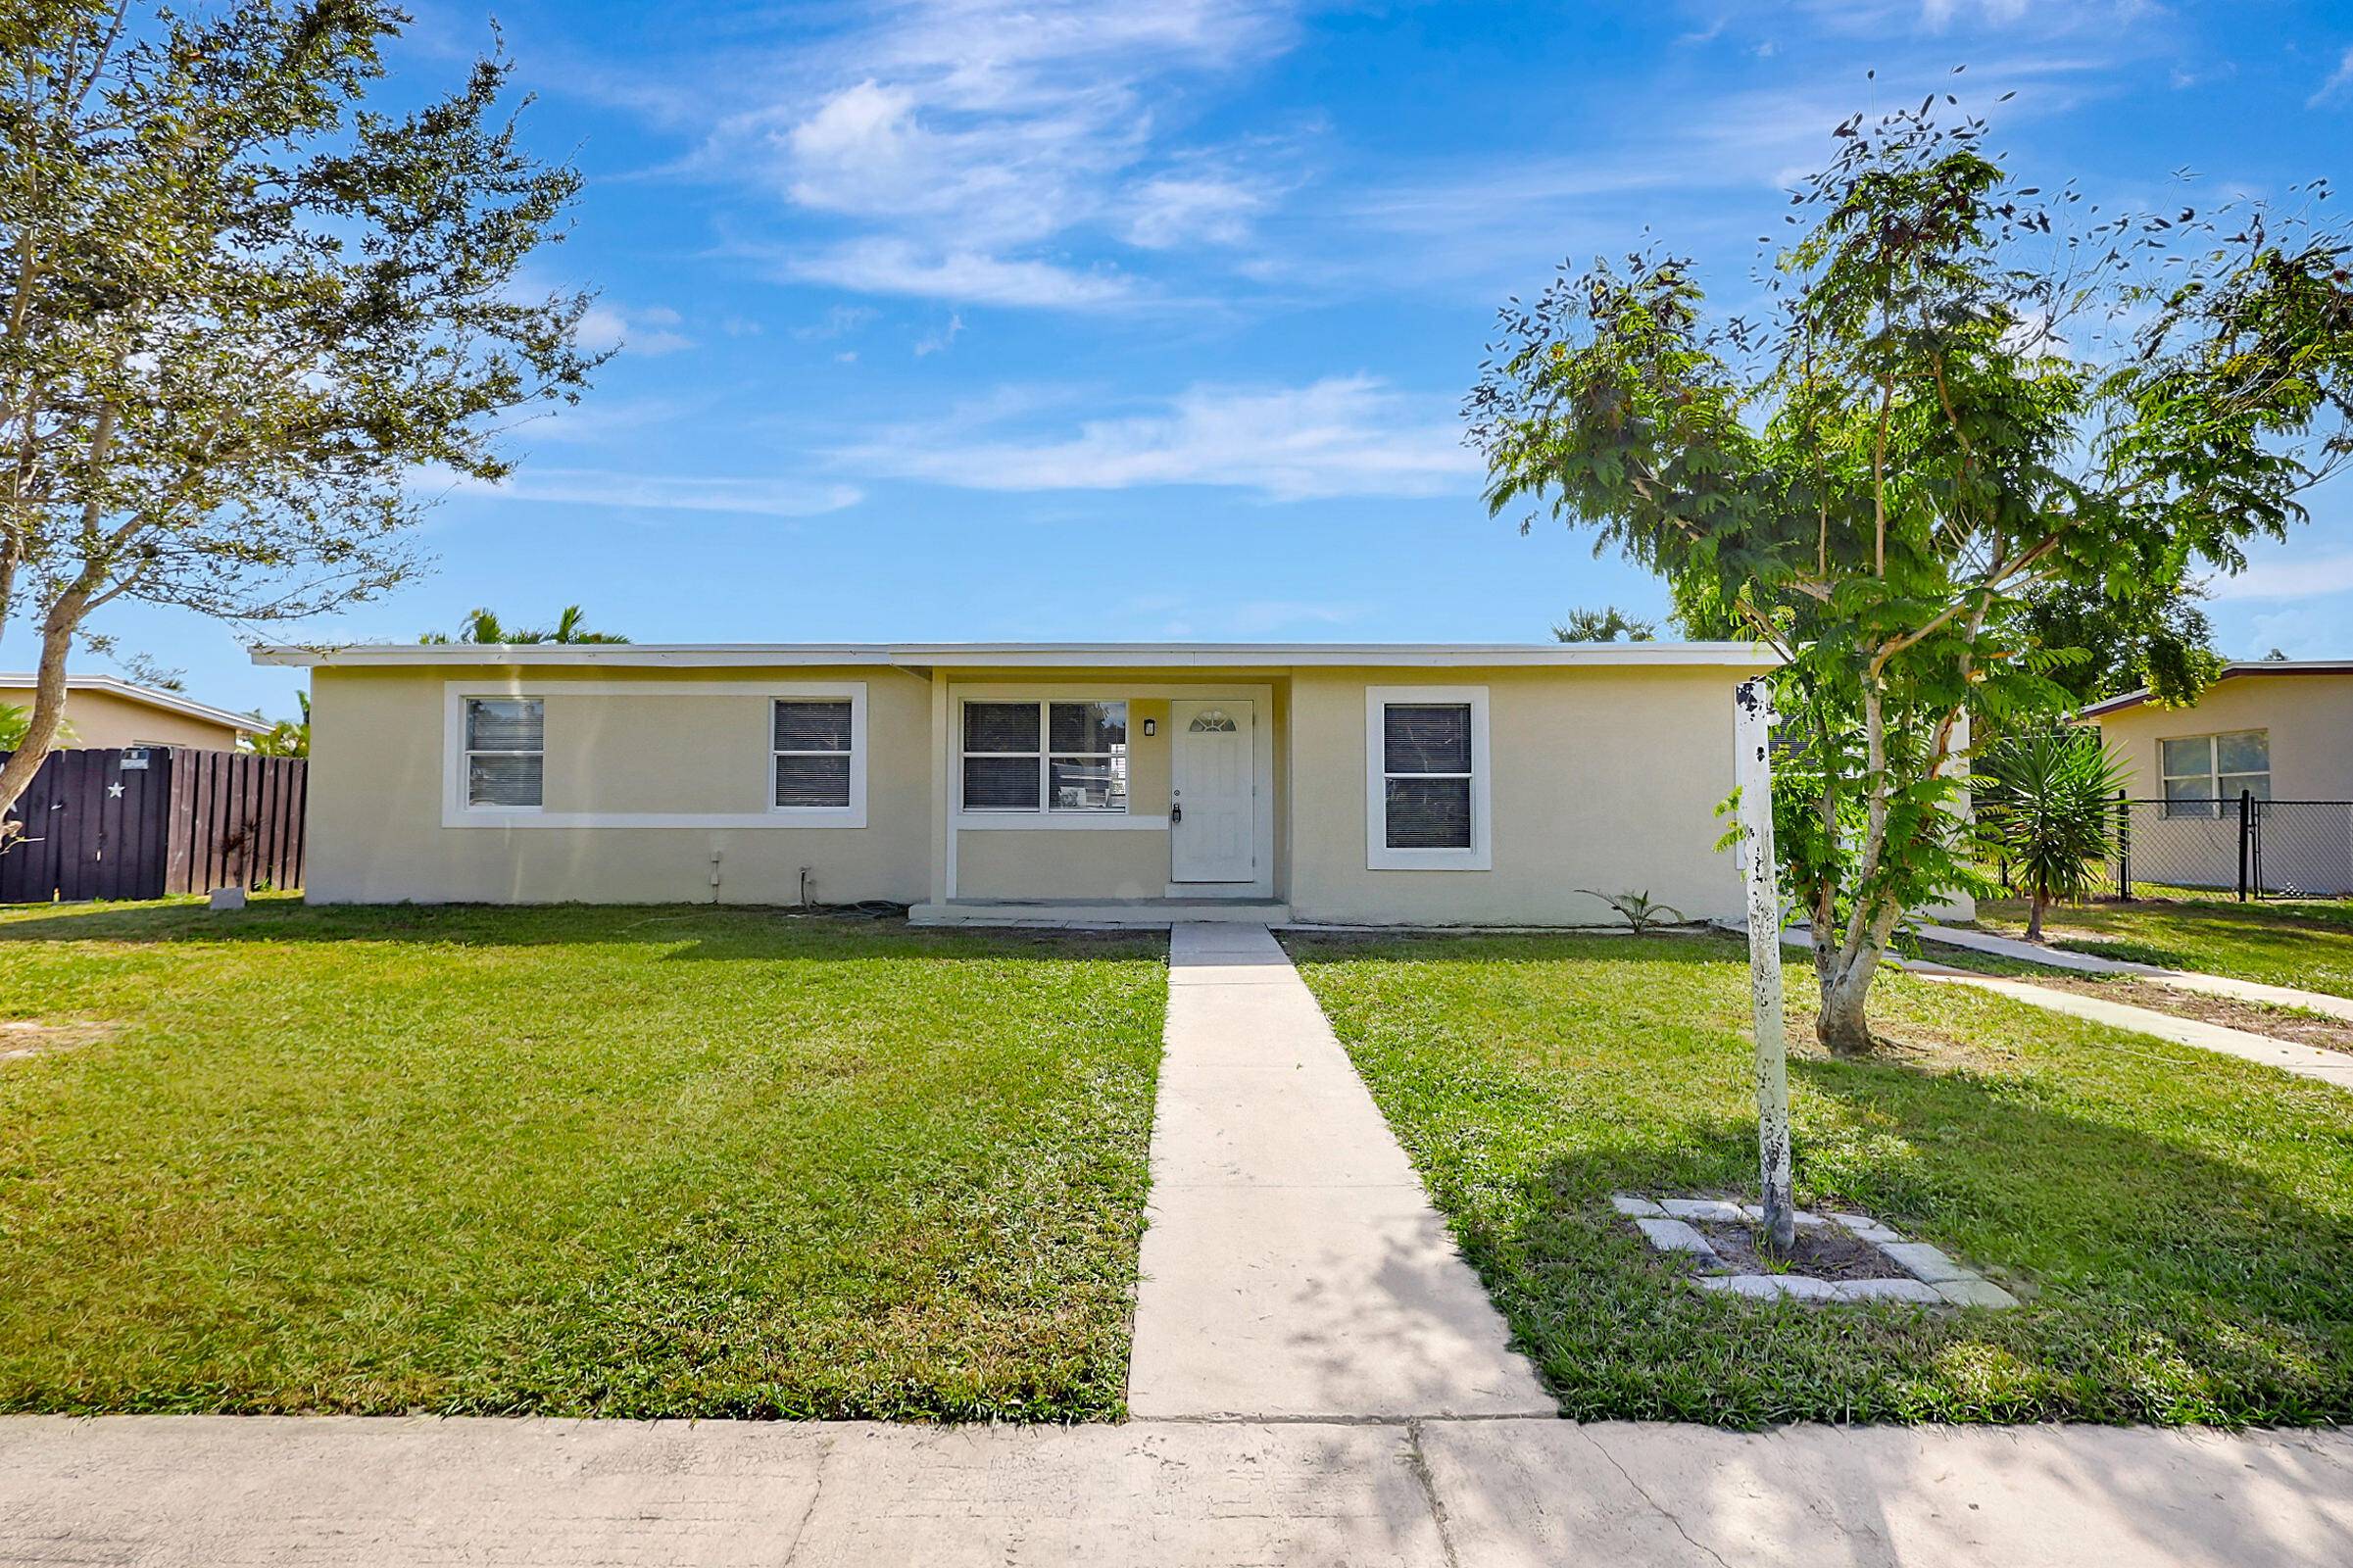 Newly renovated 3 bed 1 bath home conveniently located in the River Park area.